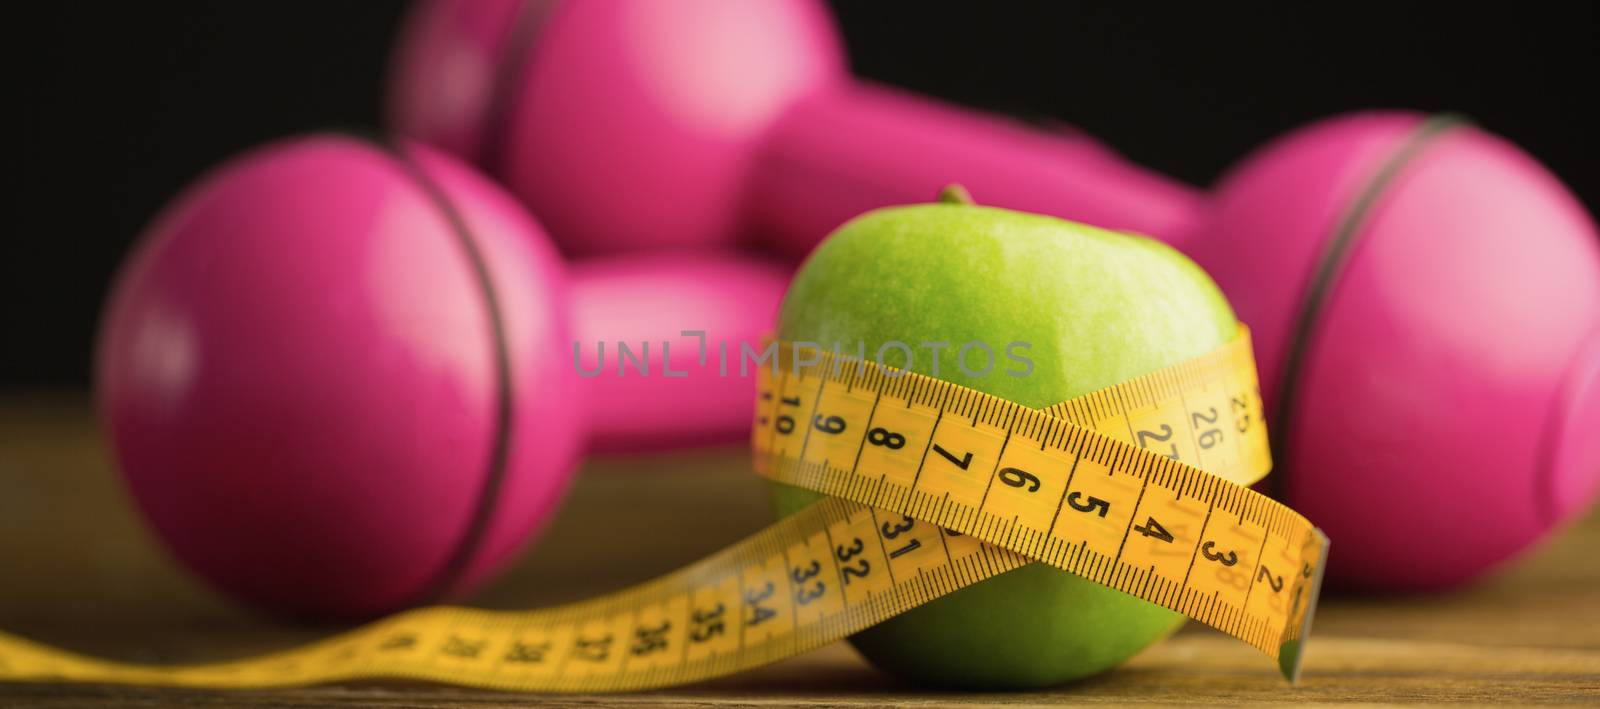 Pink dumbbells with green apple and measuring tape on wooden background